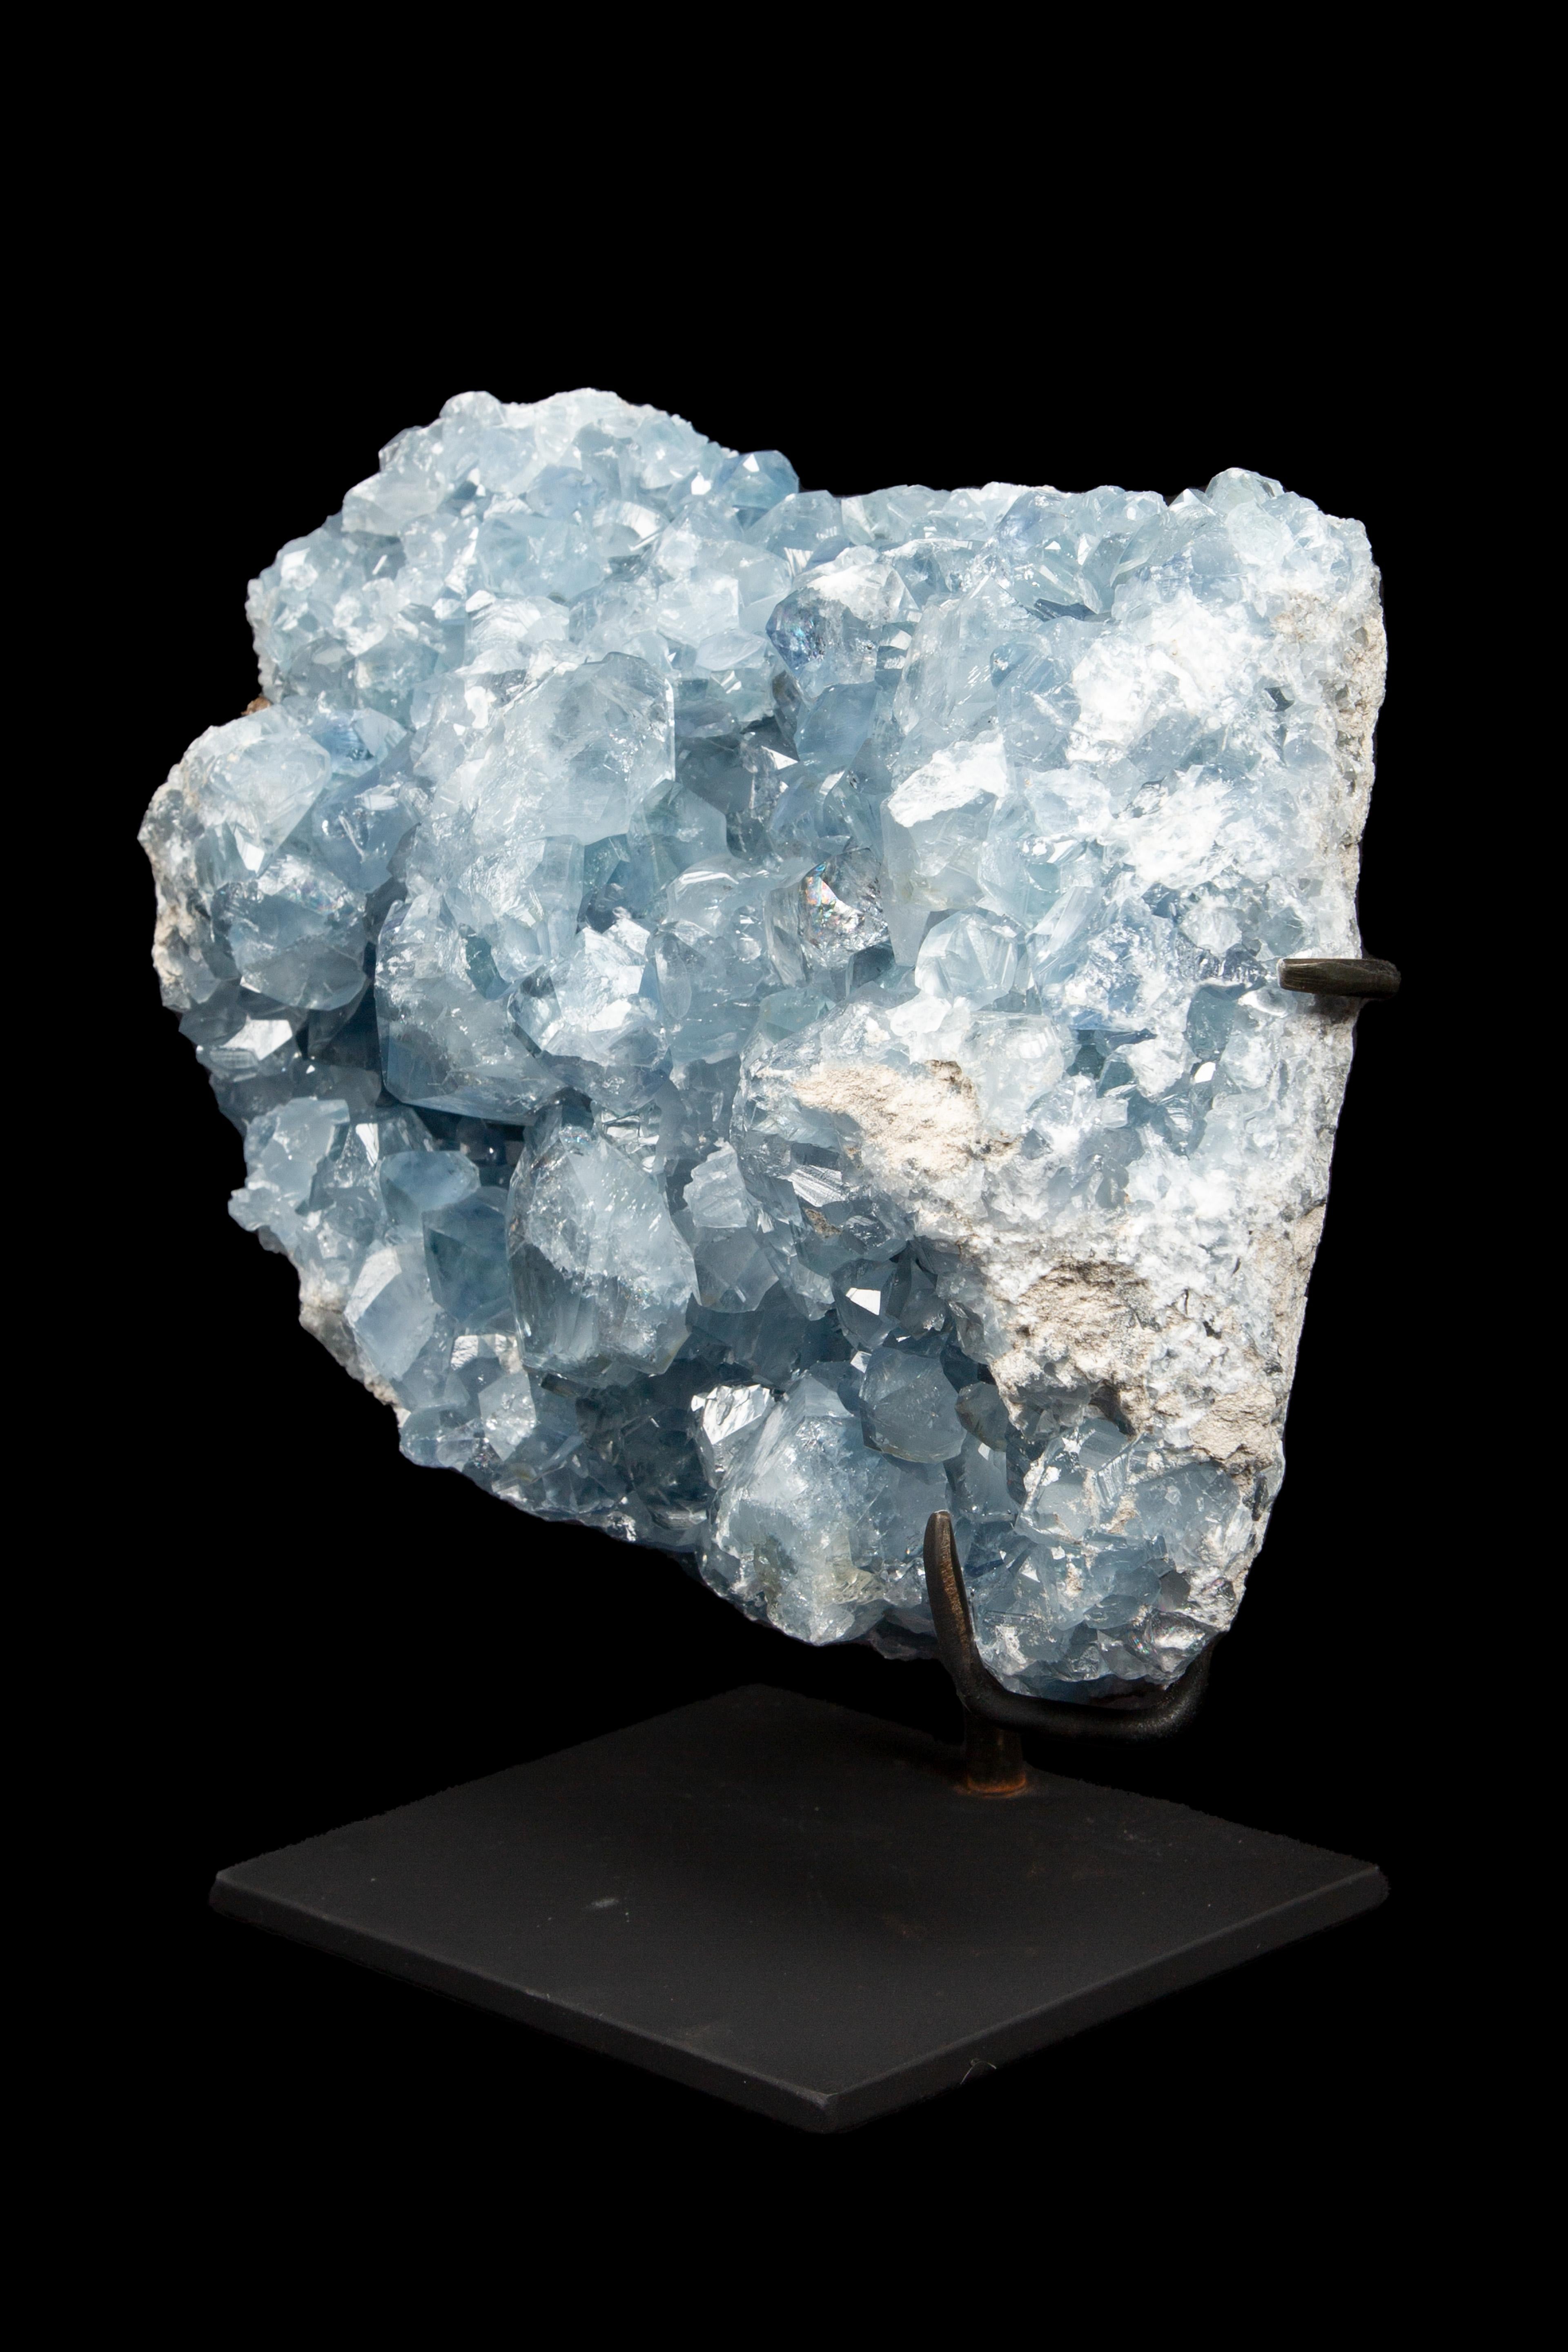 Mexican Mounted Celestial Blue Calcite Specimen: A Rarity from Mexico